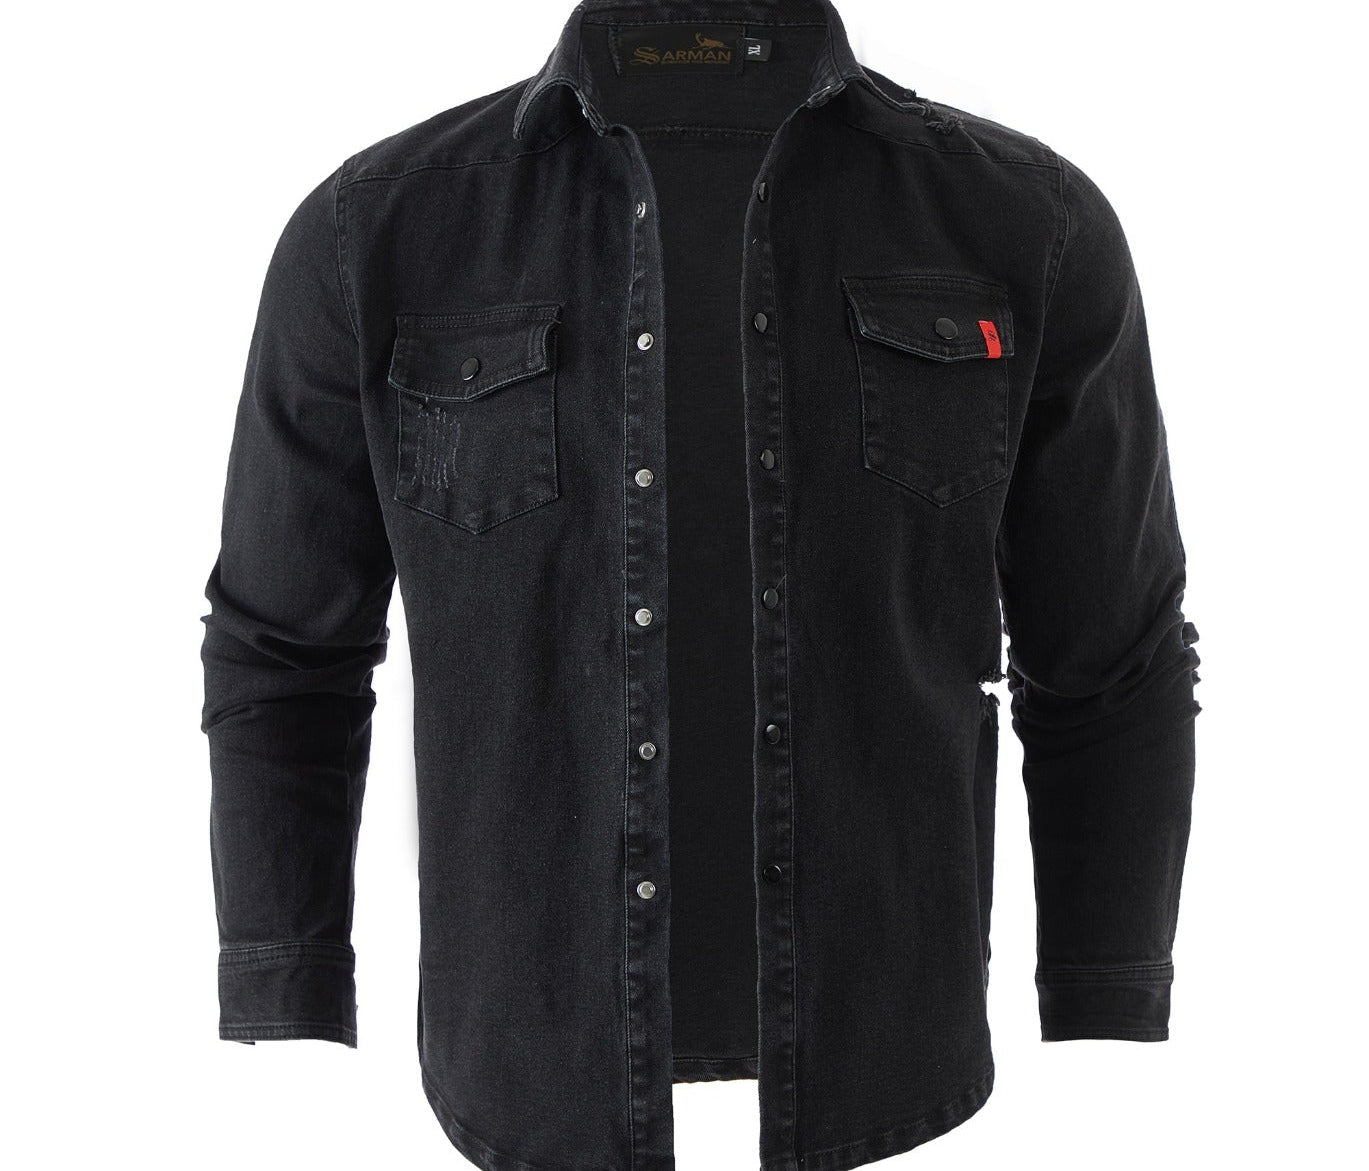 Cowboy #2 - Black Long Sleeves Jeans Shirt for Men (PRE-ORDER DISPATCH DATE 25 DECEMBER 2023) - Sarman Fashion - Wholesale Clothing Fashion Brand for Men from Canada